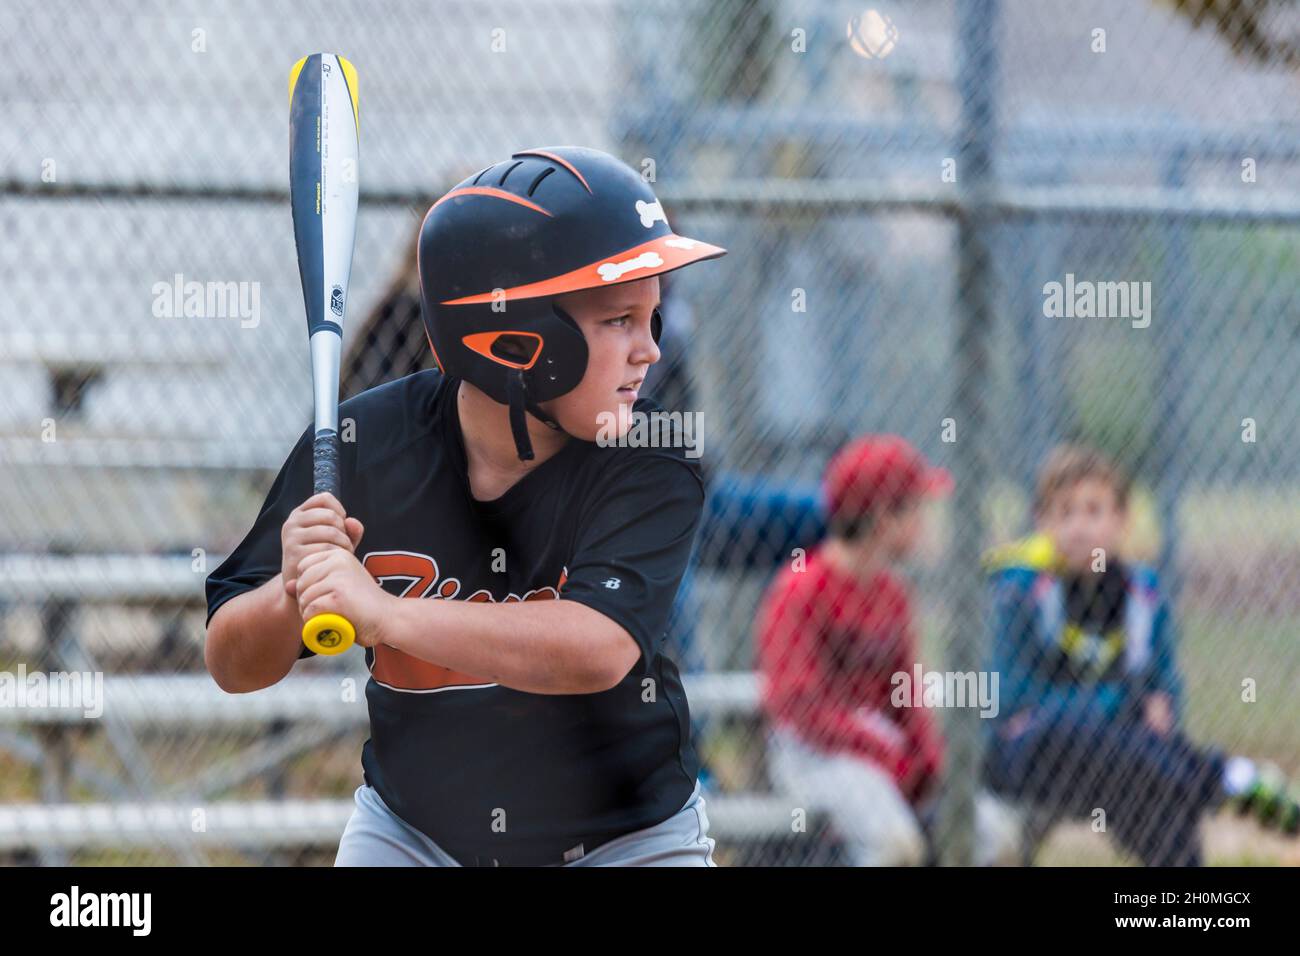 Young pre-teen male focusing on the pitched ball while playing baseball in uniform Stock Photo